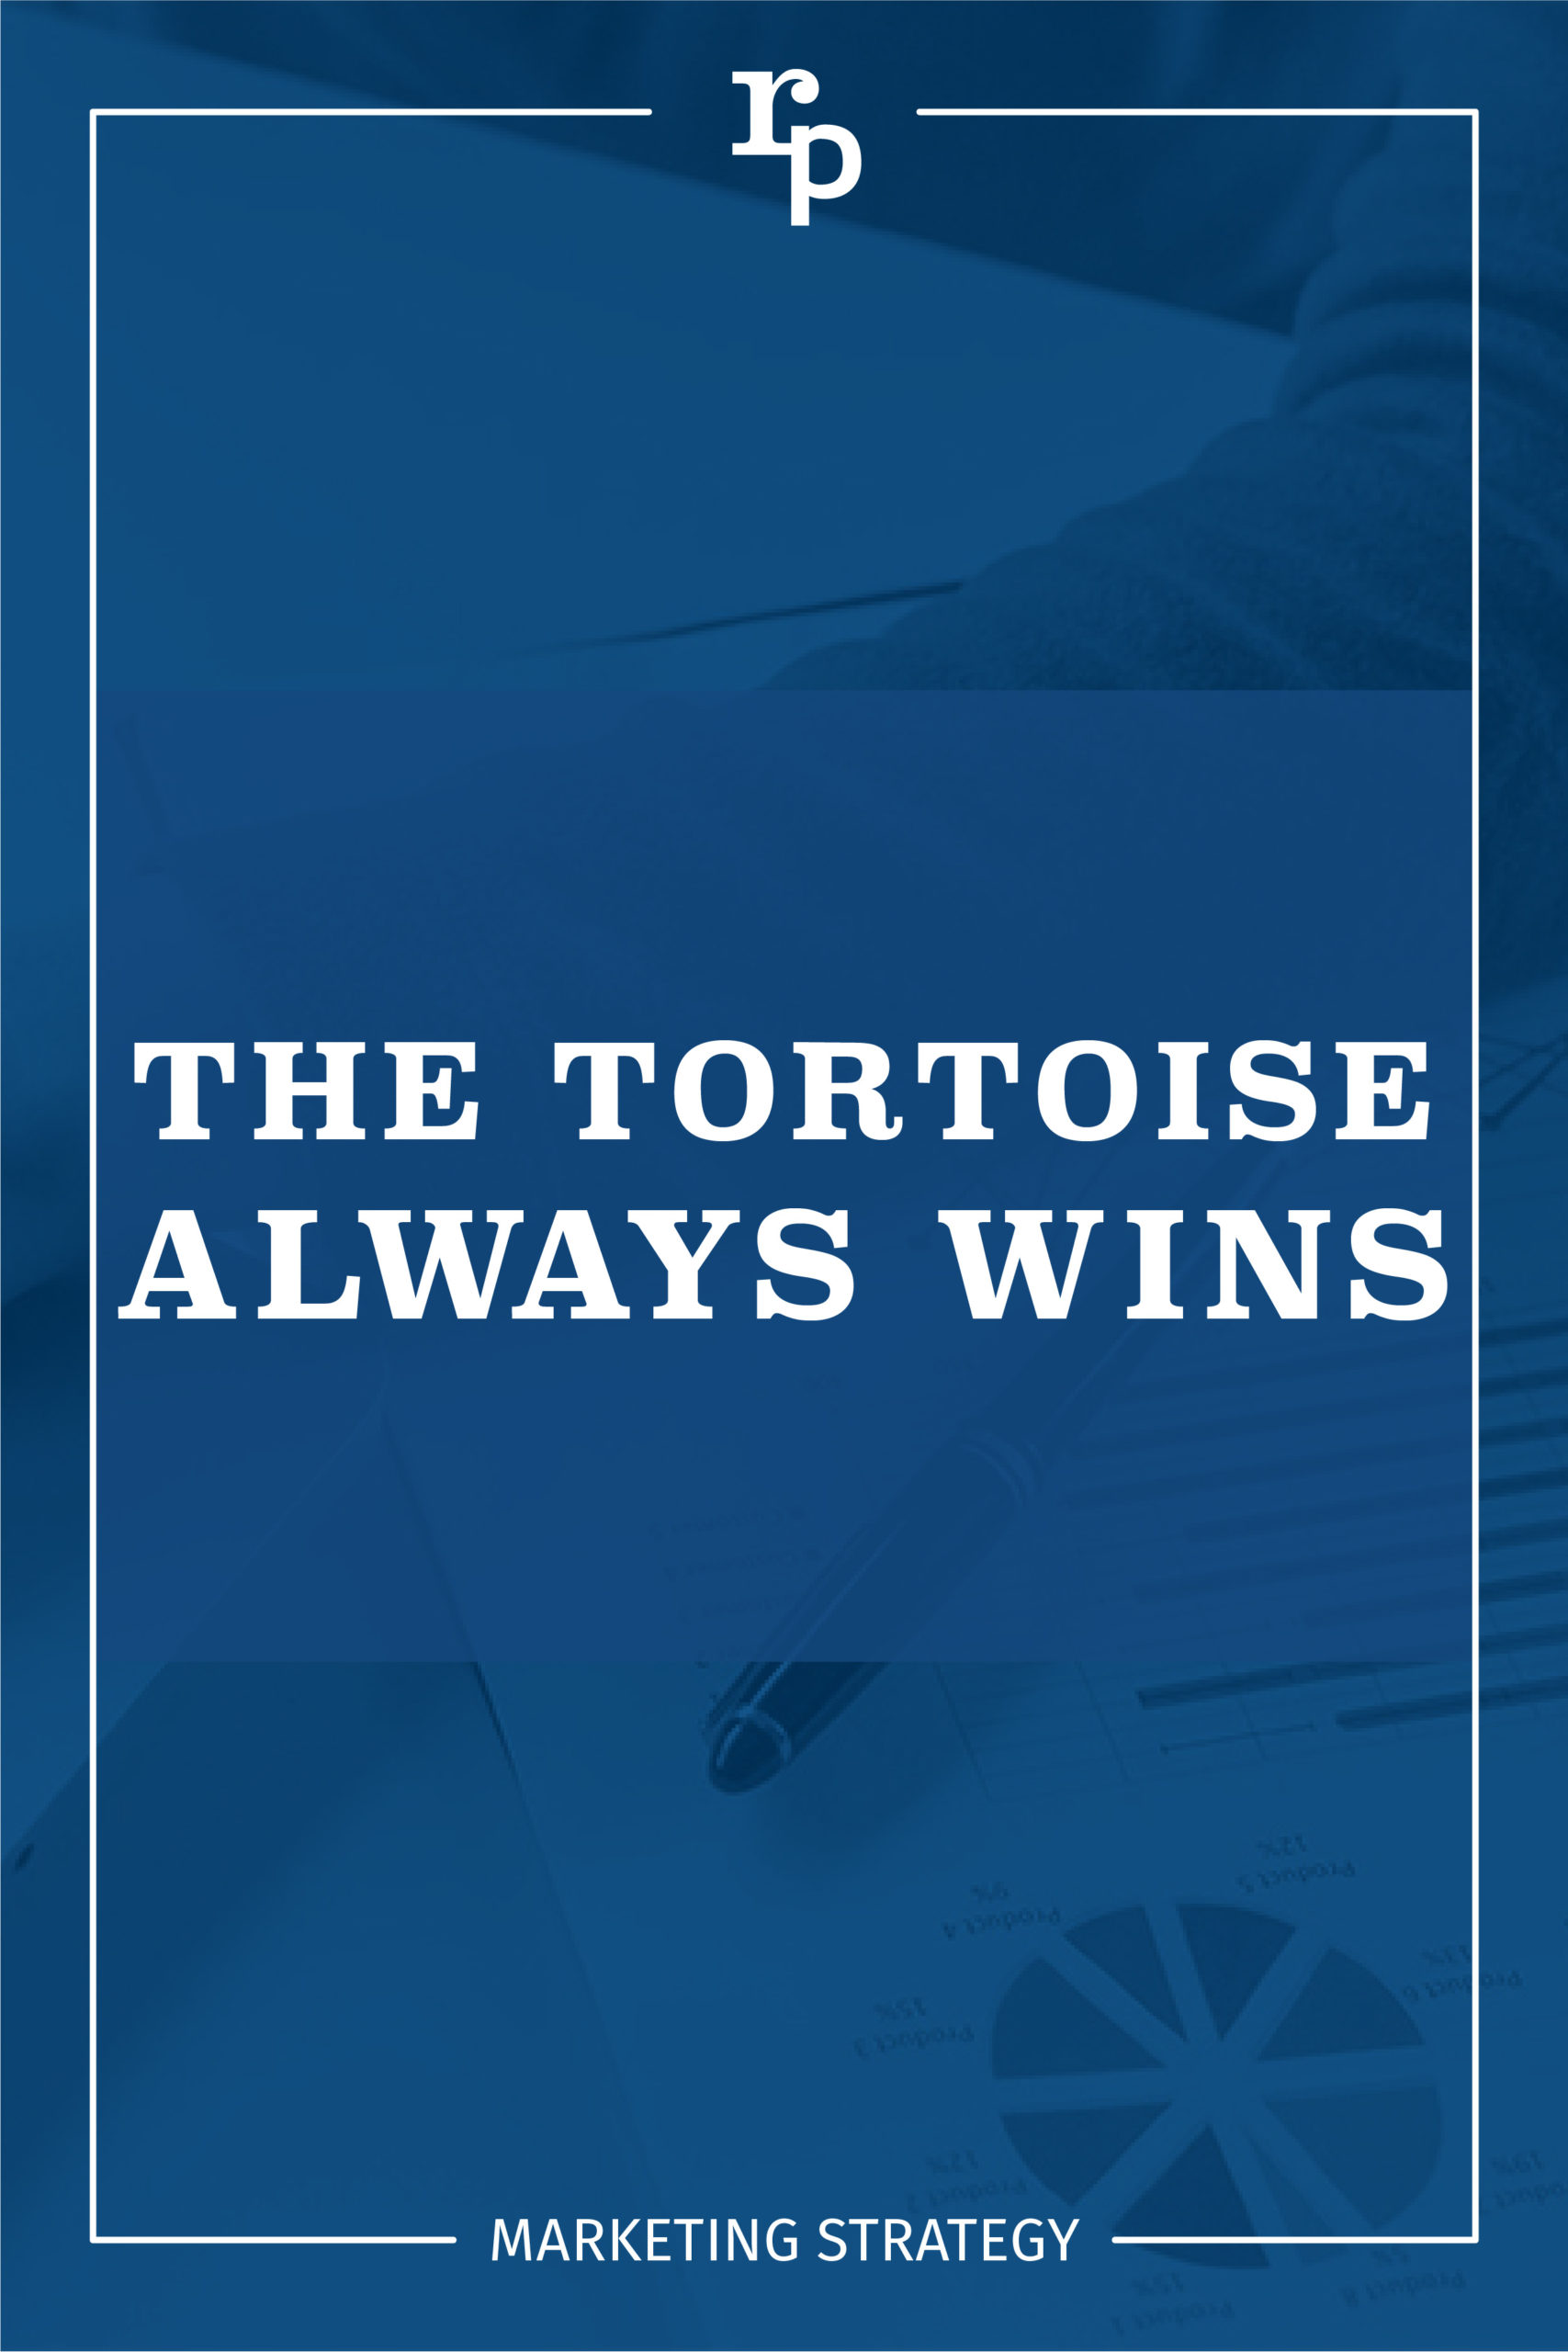 the tortoise always wins strategy1 pin blue scaled